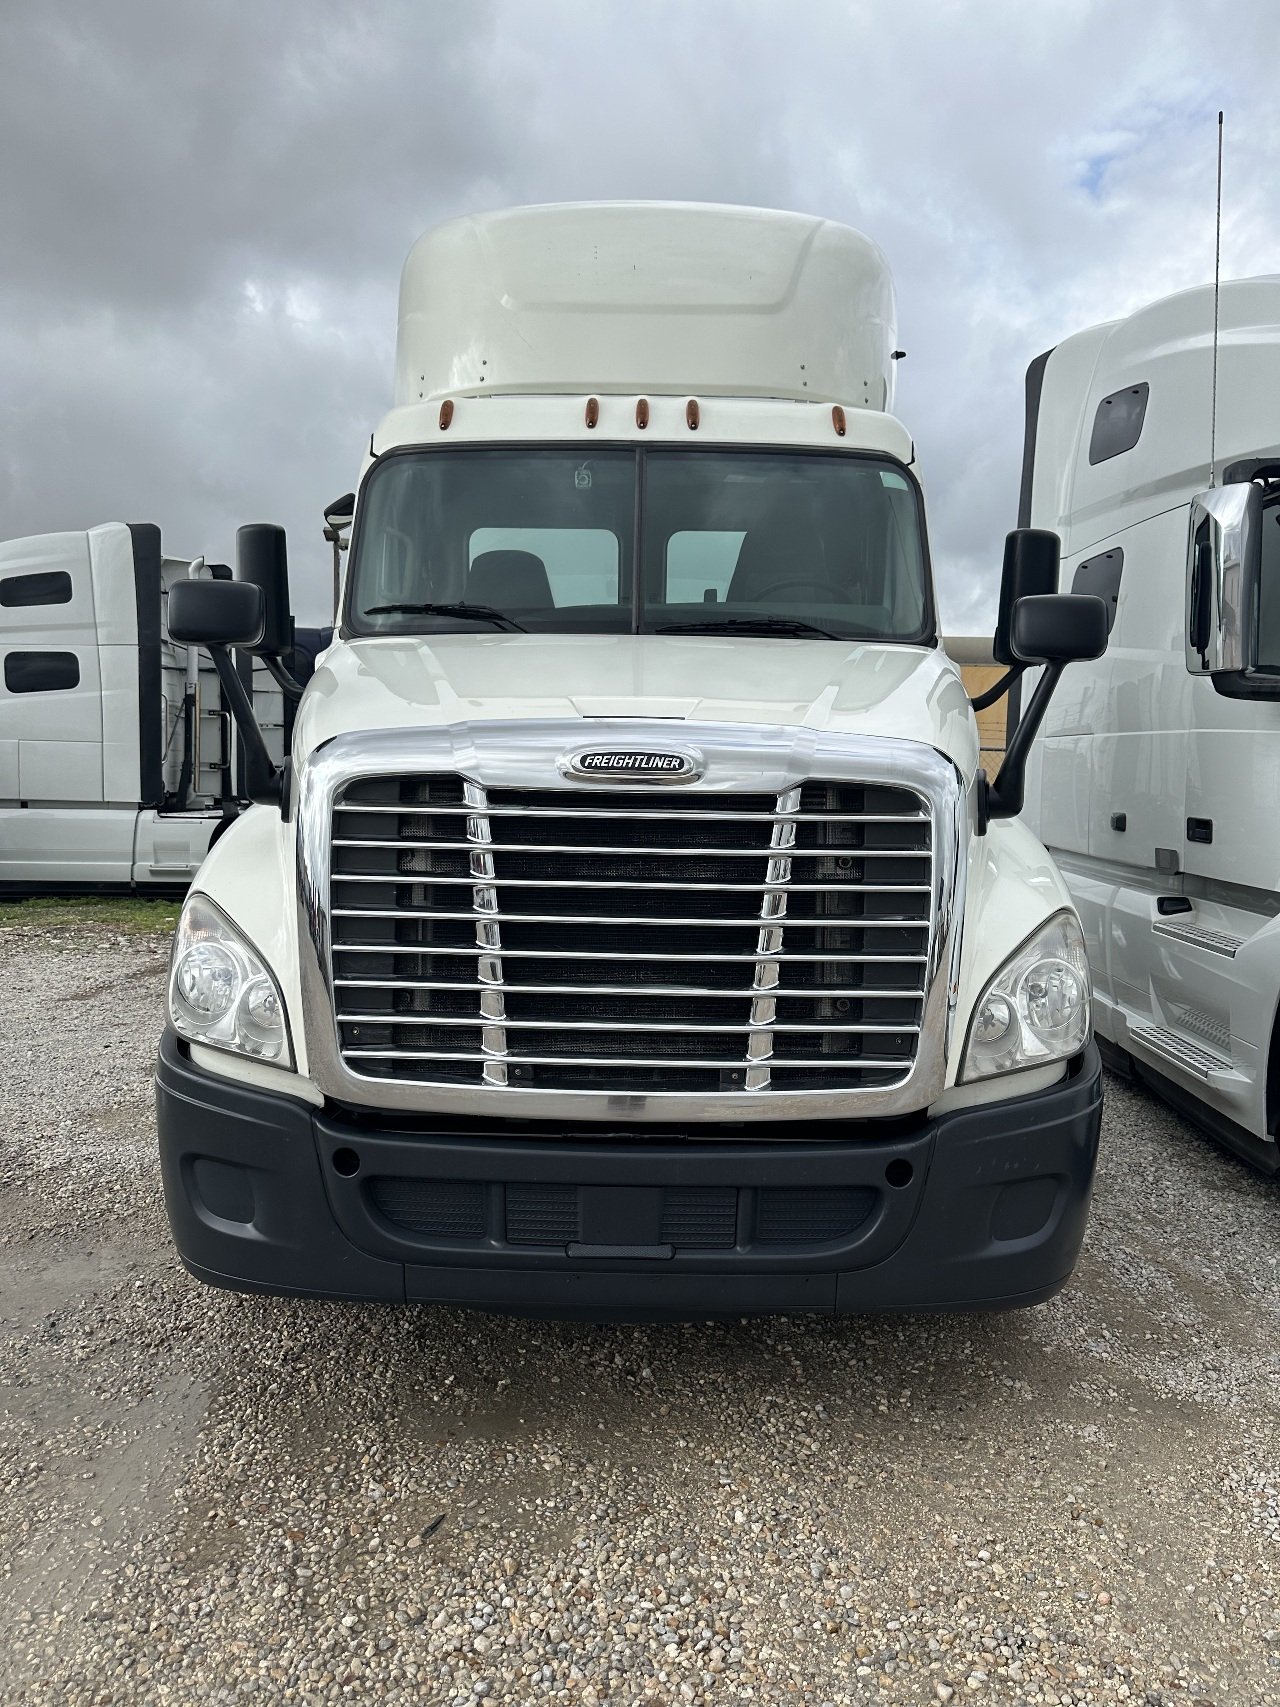 USED 2017 FREIGHTLINER CASCADIA DAYCAB TRUCK #3668